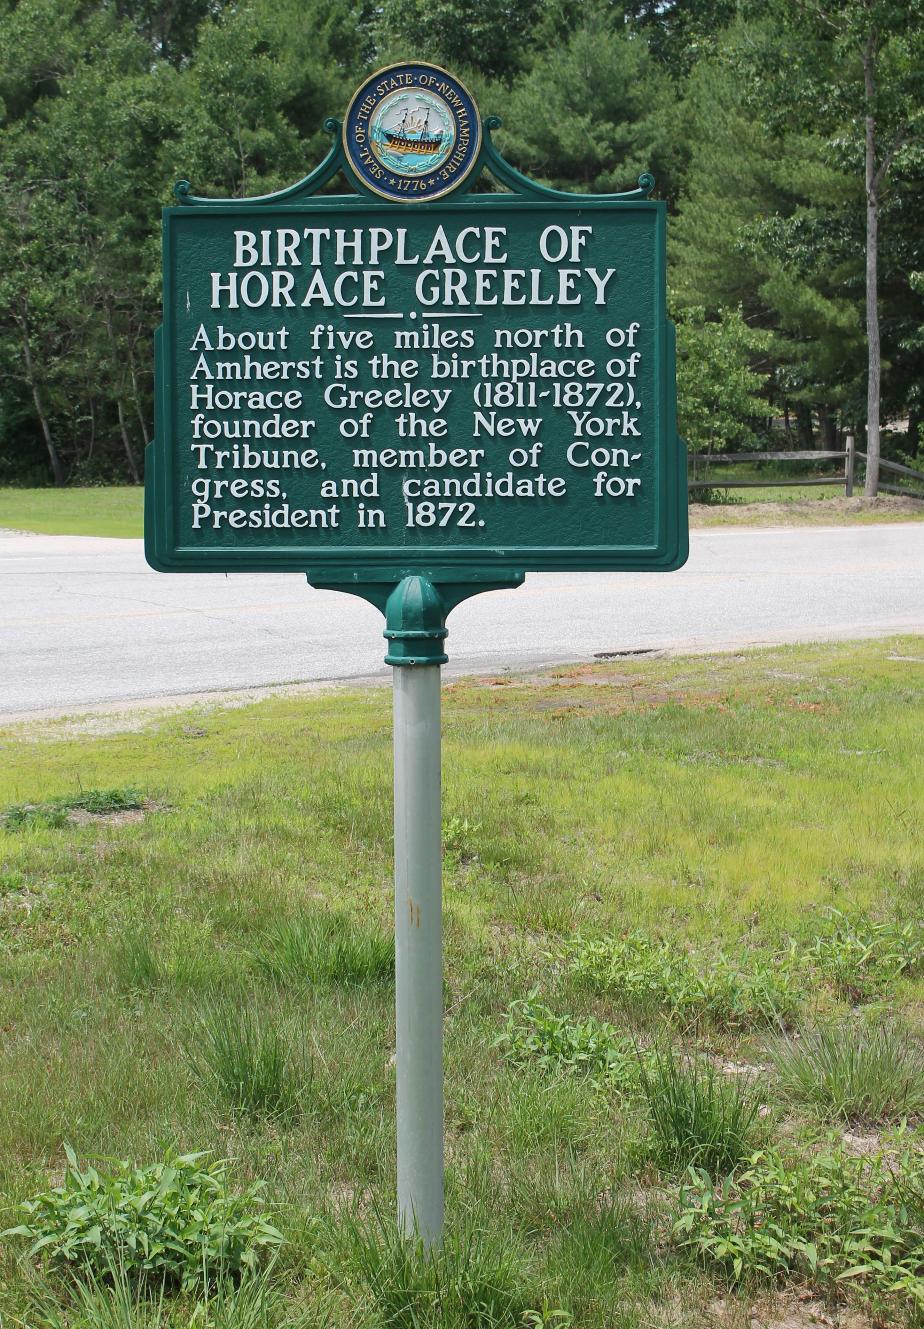 Horace Greeley Birthplace Historical Marker - Amherst New Hampshire